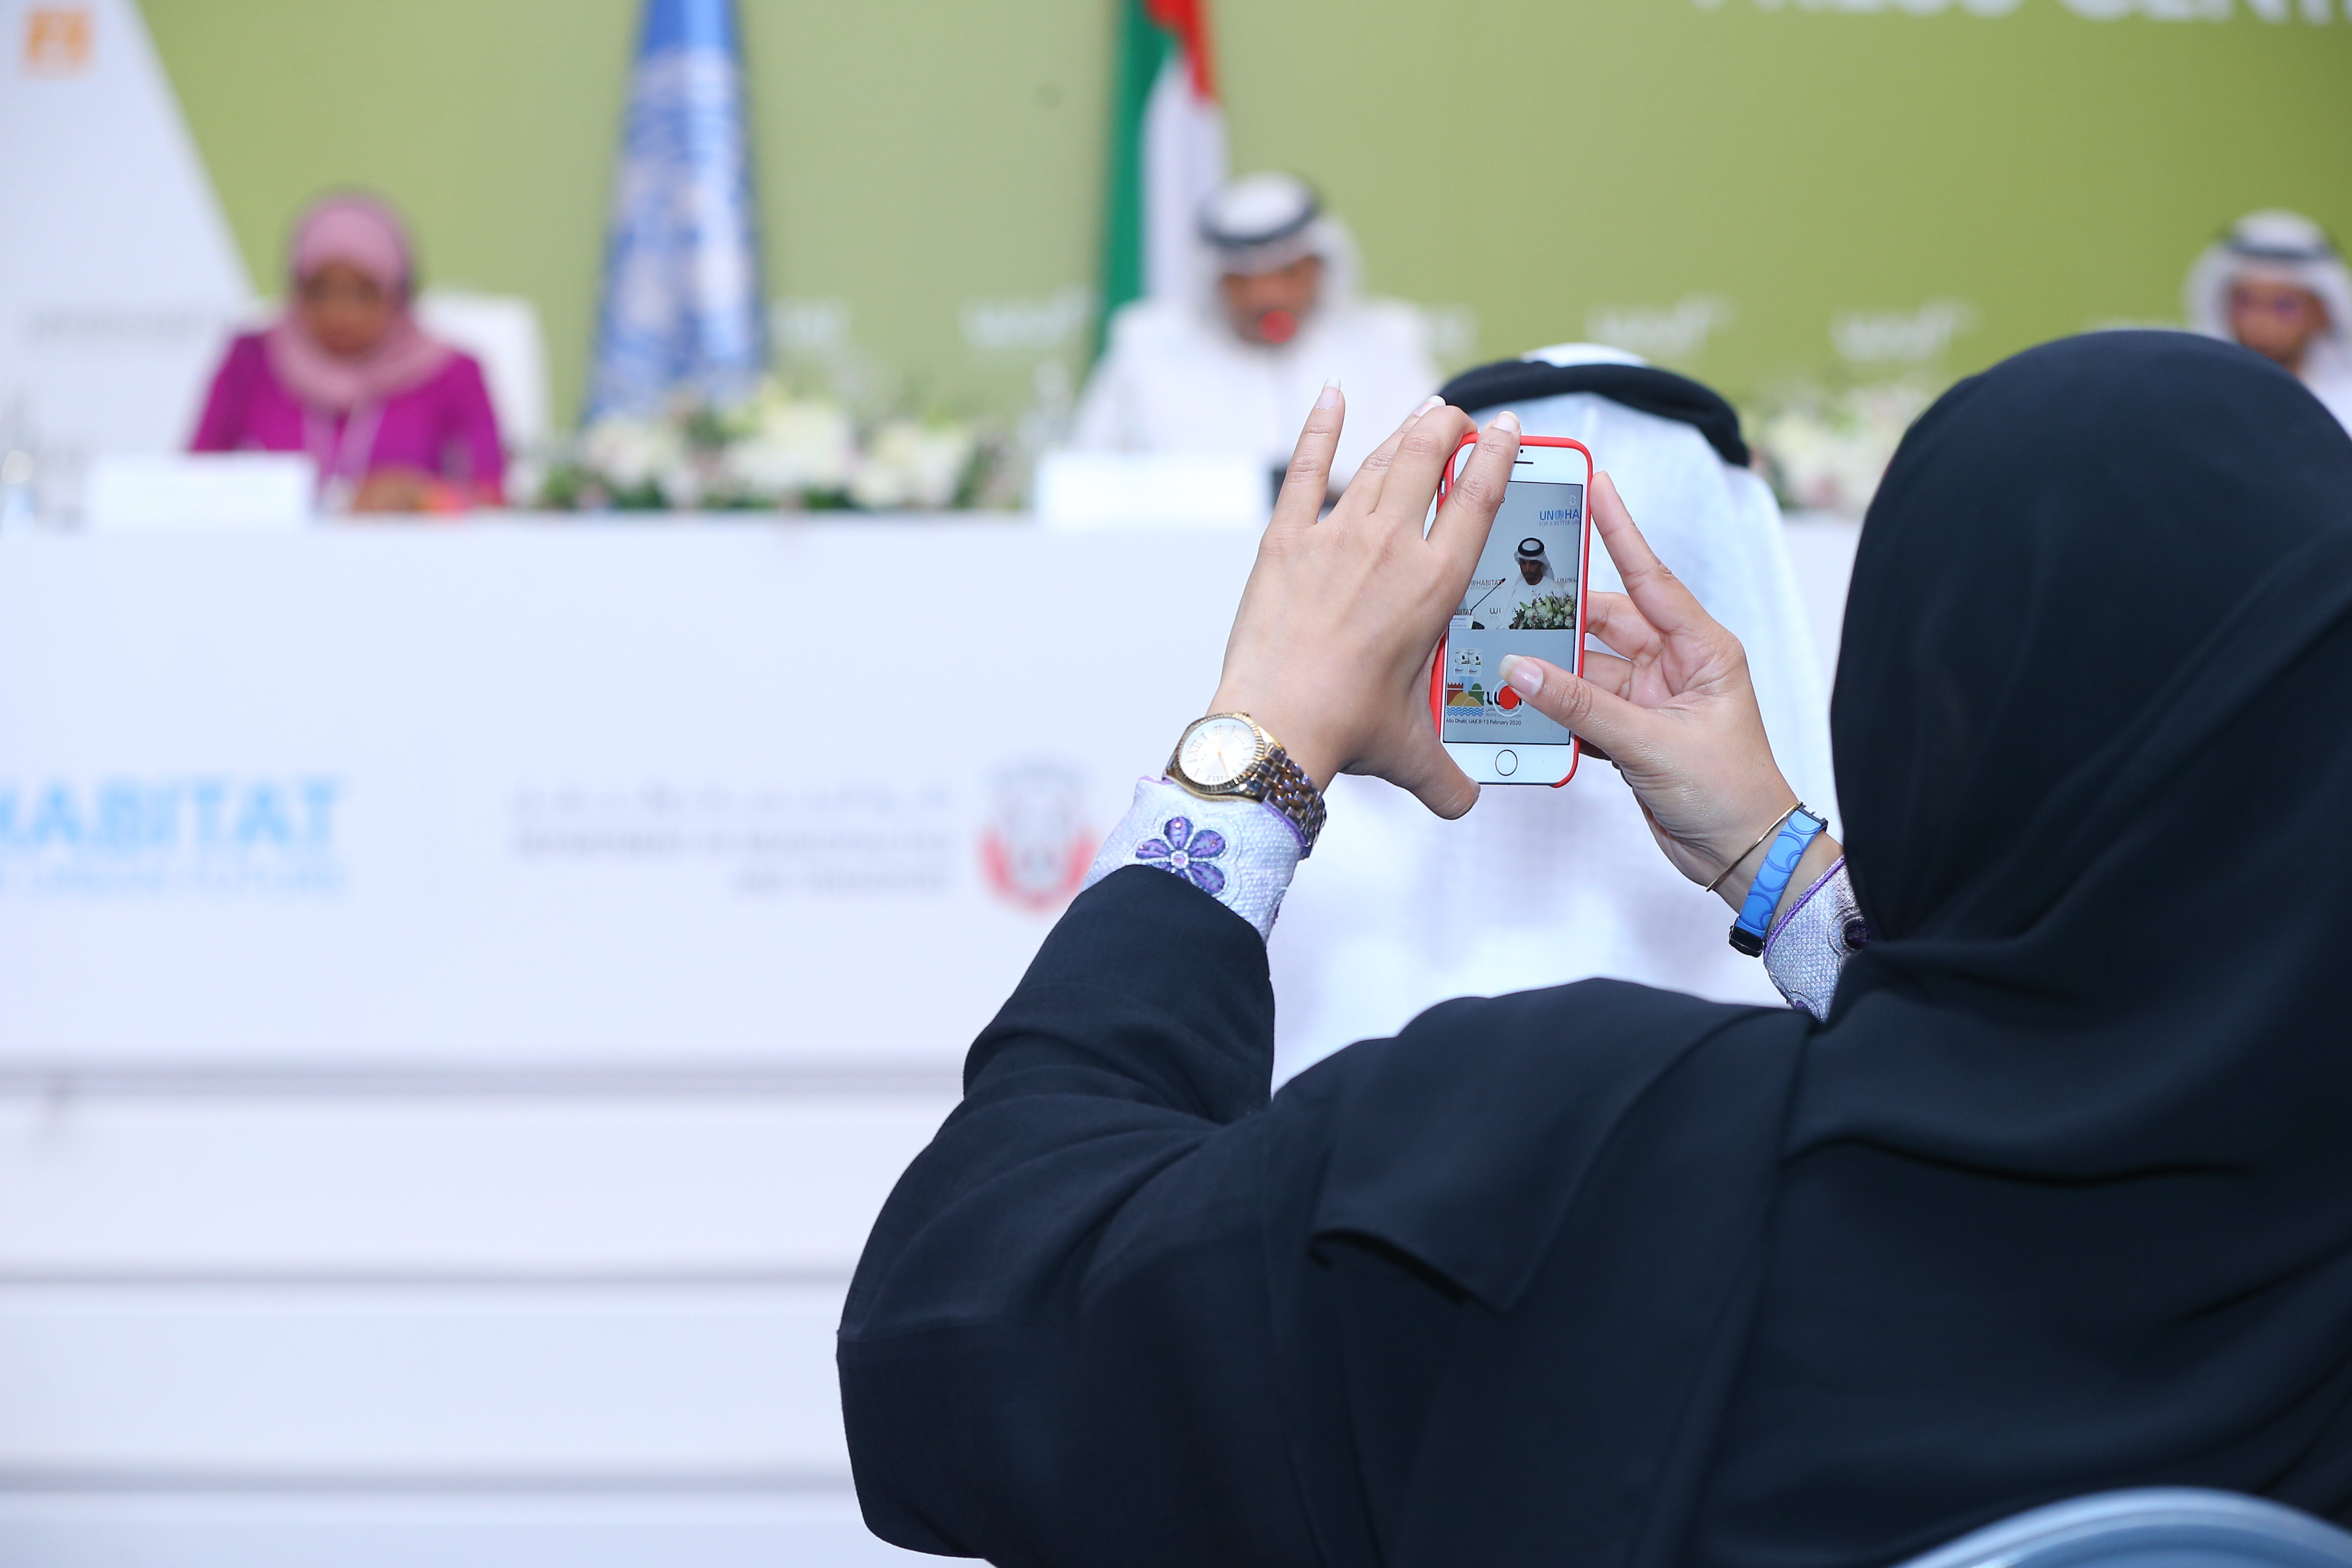 A woman takes a photo at the press confernce